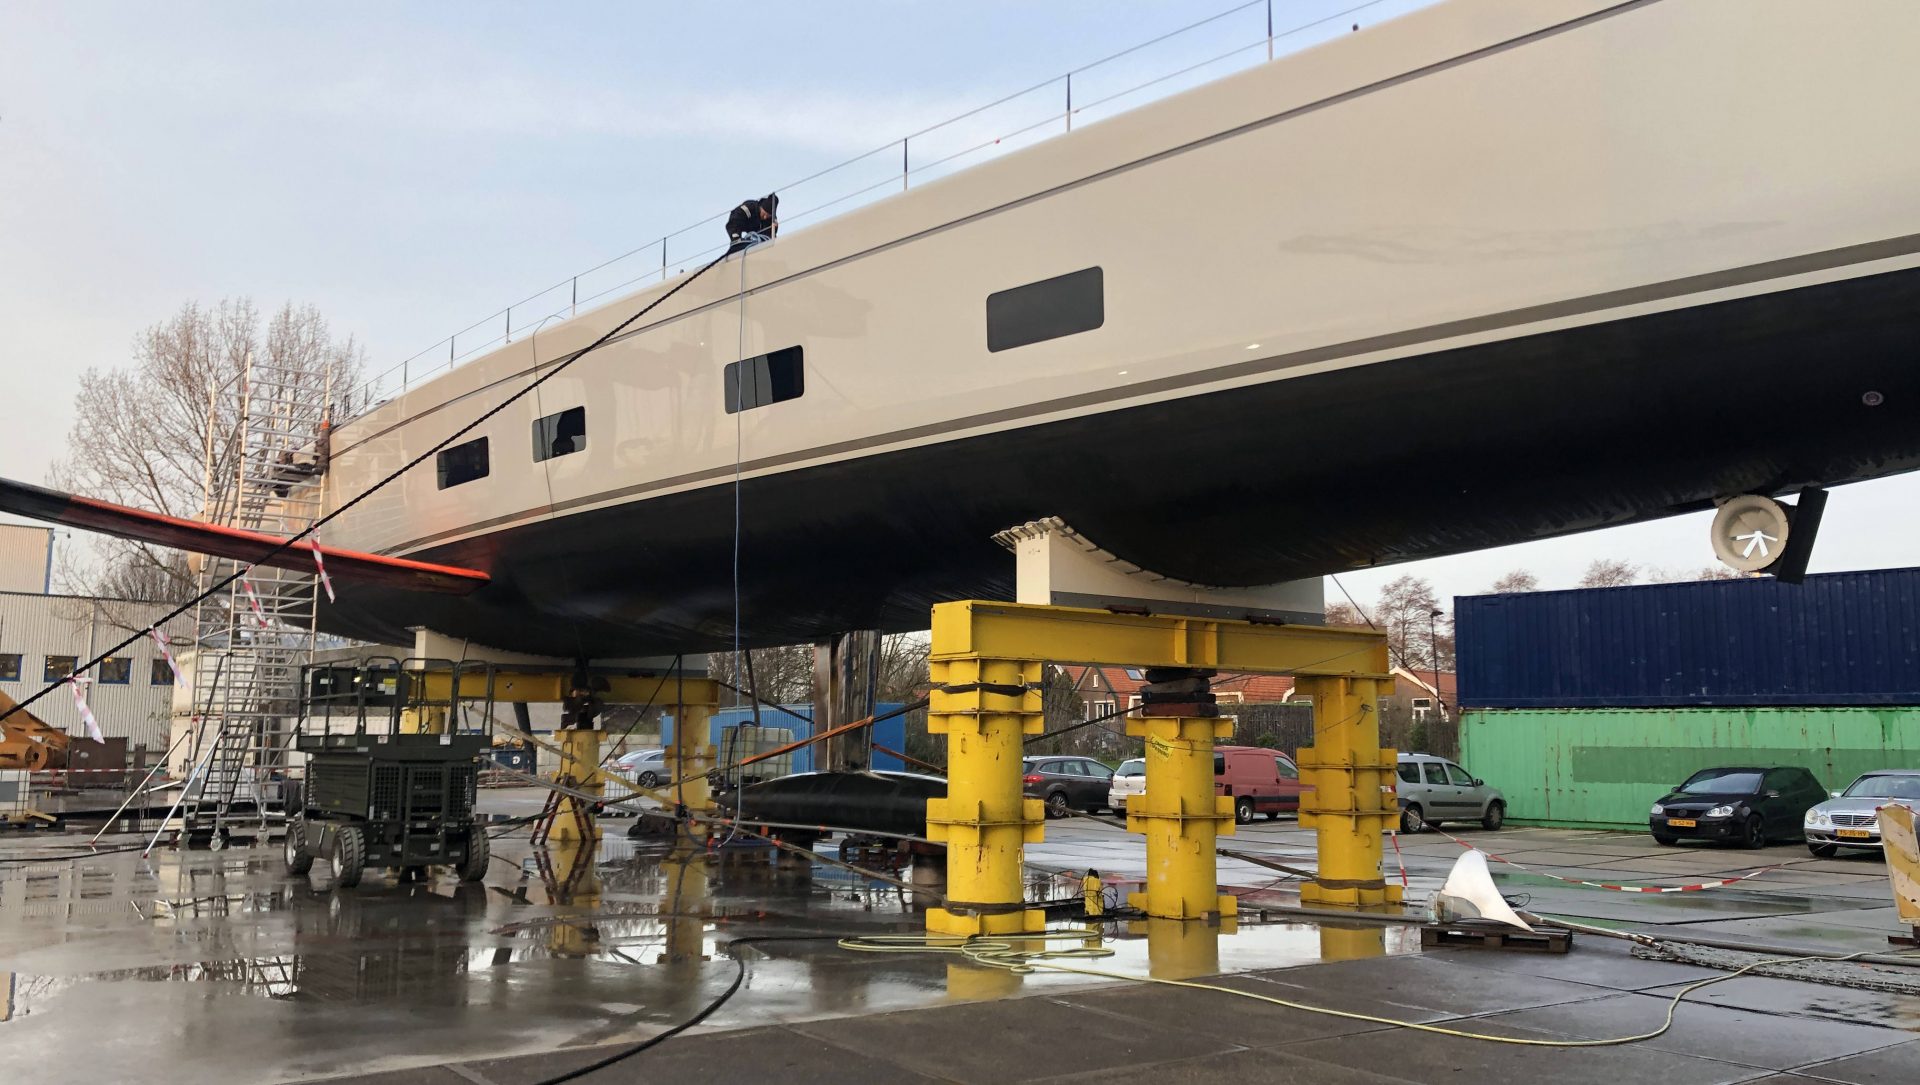 Service & Repair for yachts